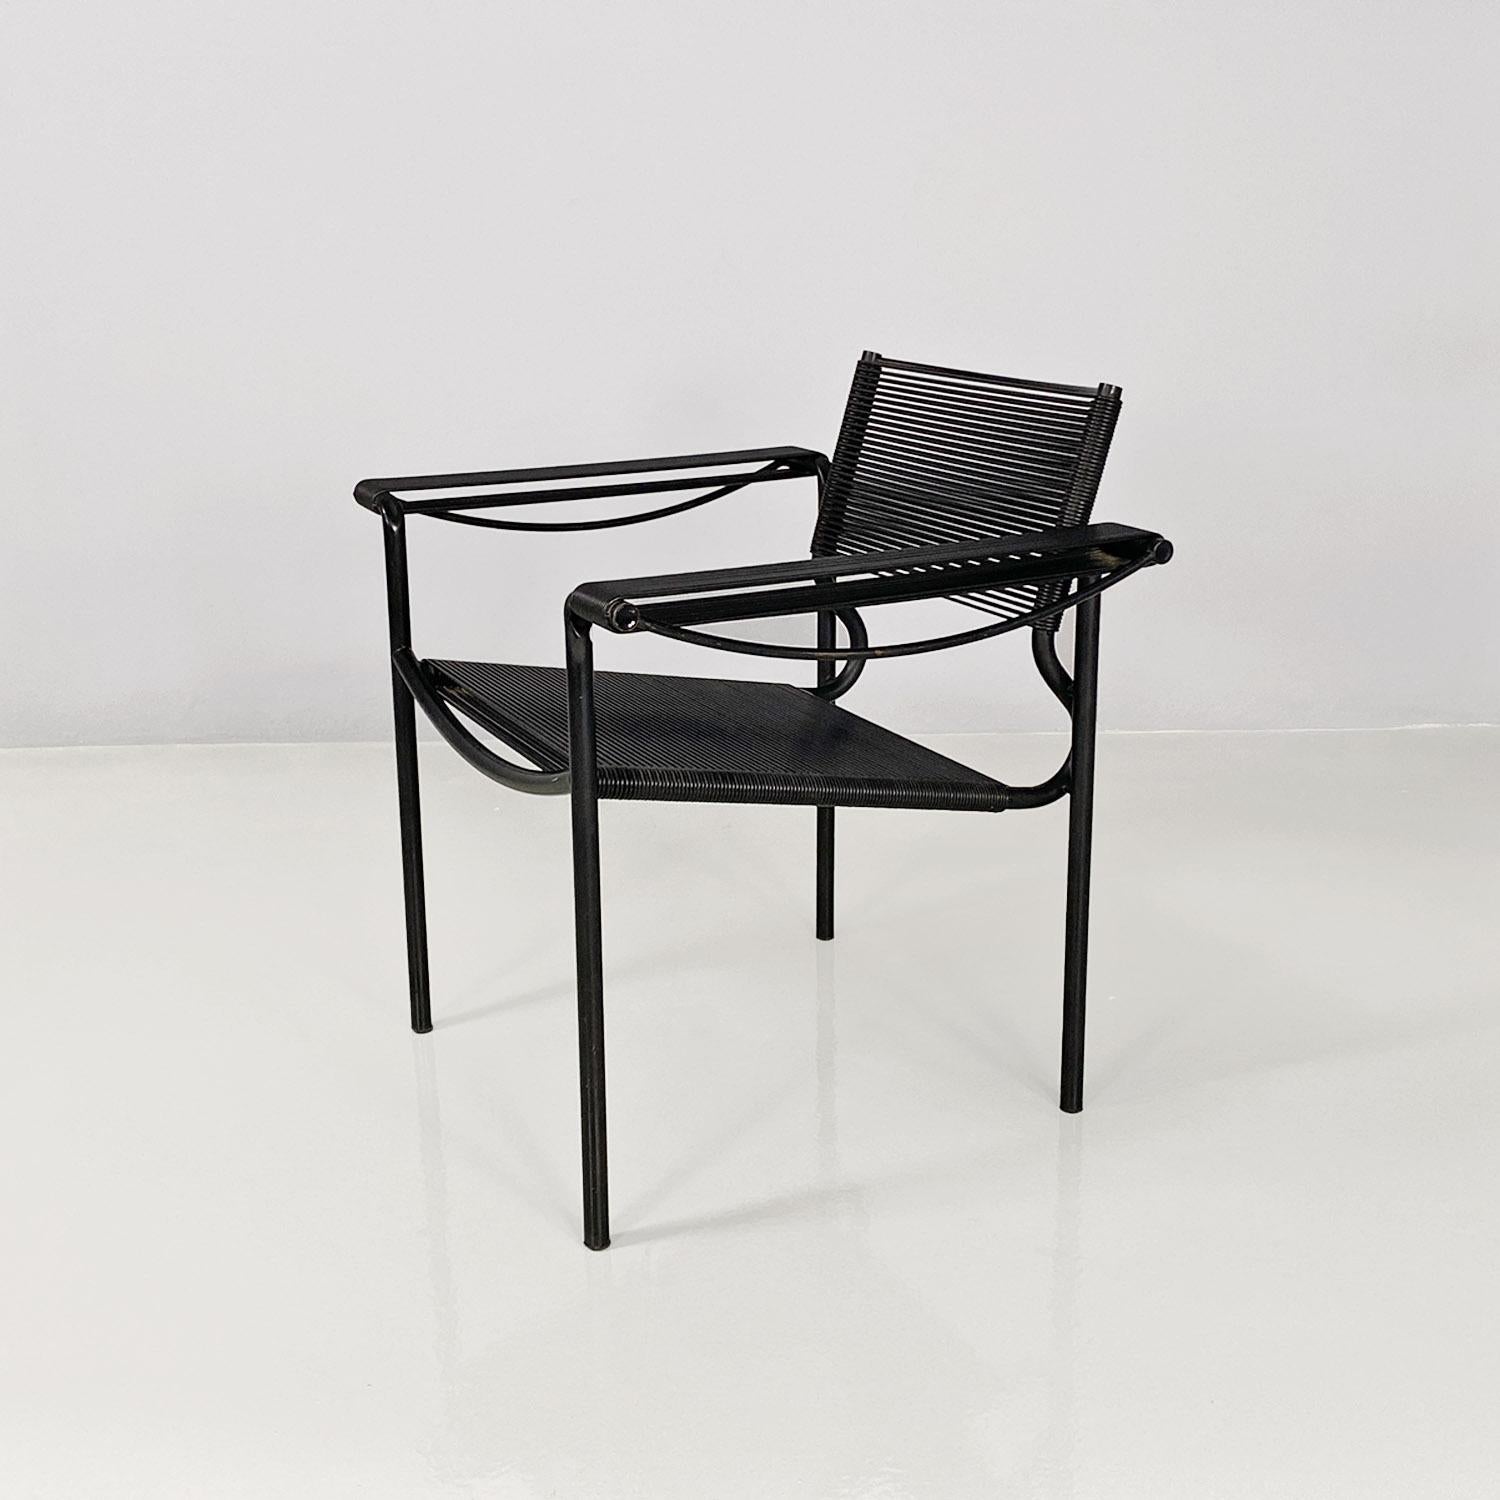 Italian modern black plastic and metal Spaghetti armchairs by Giandomenico Belotti for Alias, 1980s
Spaghetti armchair with black painted metal structure with a geometric shape and seat, backrest and armrests in black plastic or scooby.
Produced by